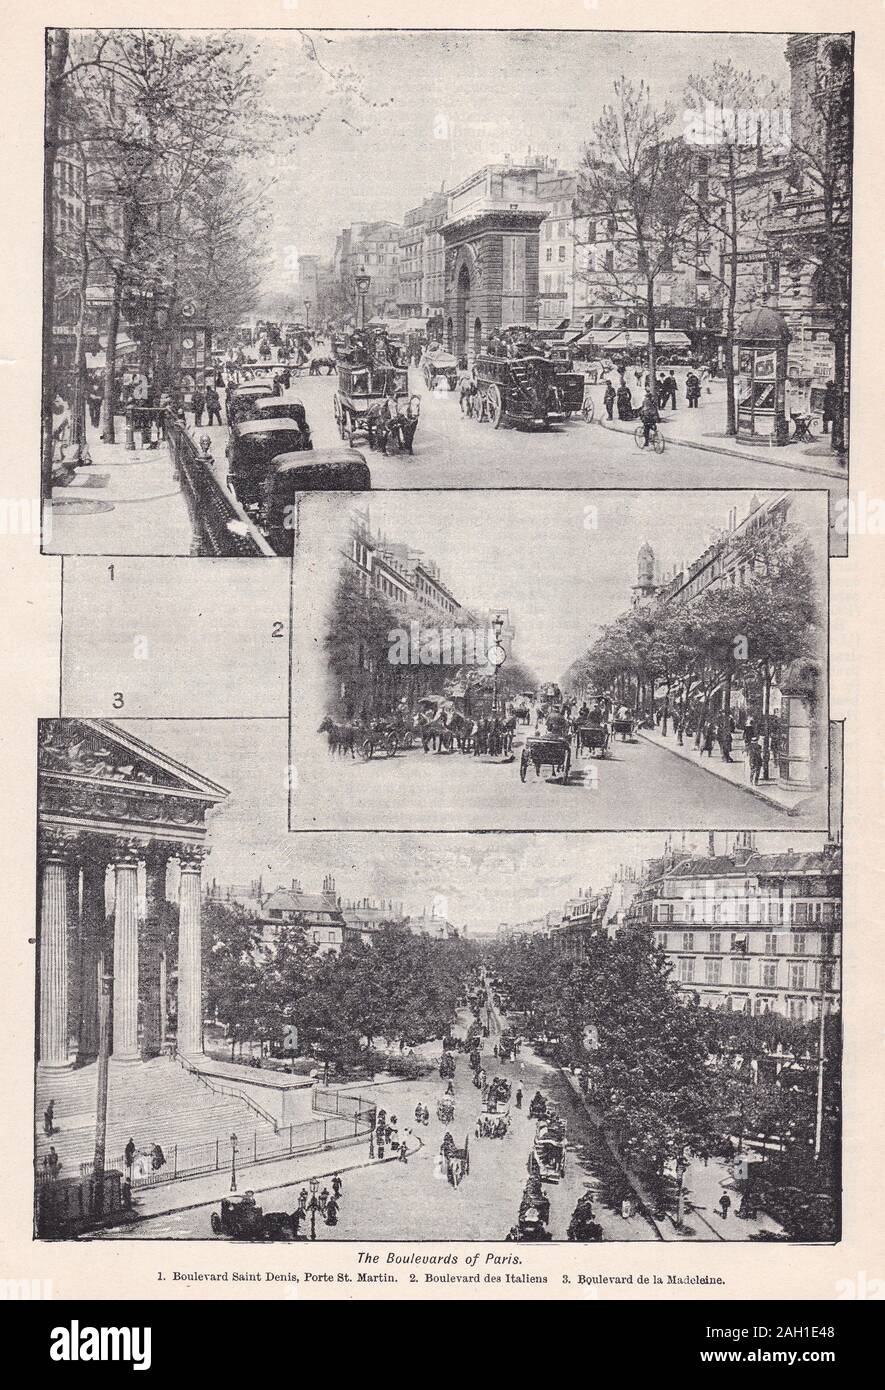 Vintage black and white photos of The Boulevards of Paris 1900s Stock Photo